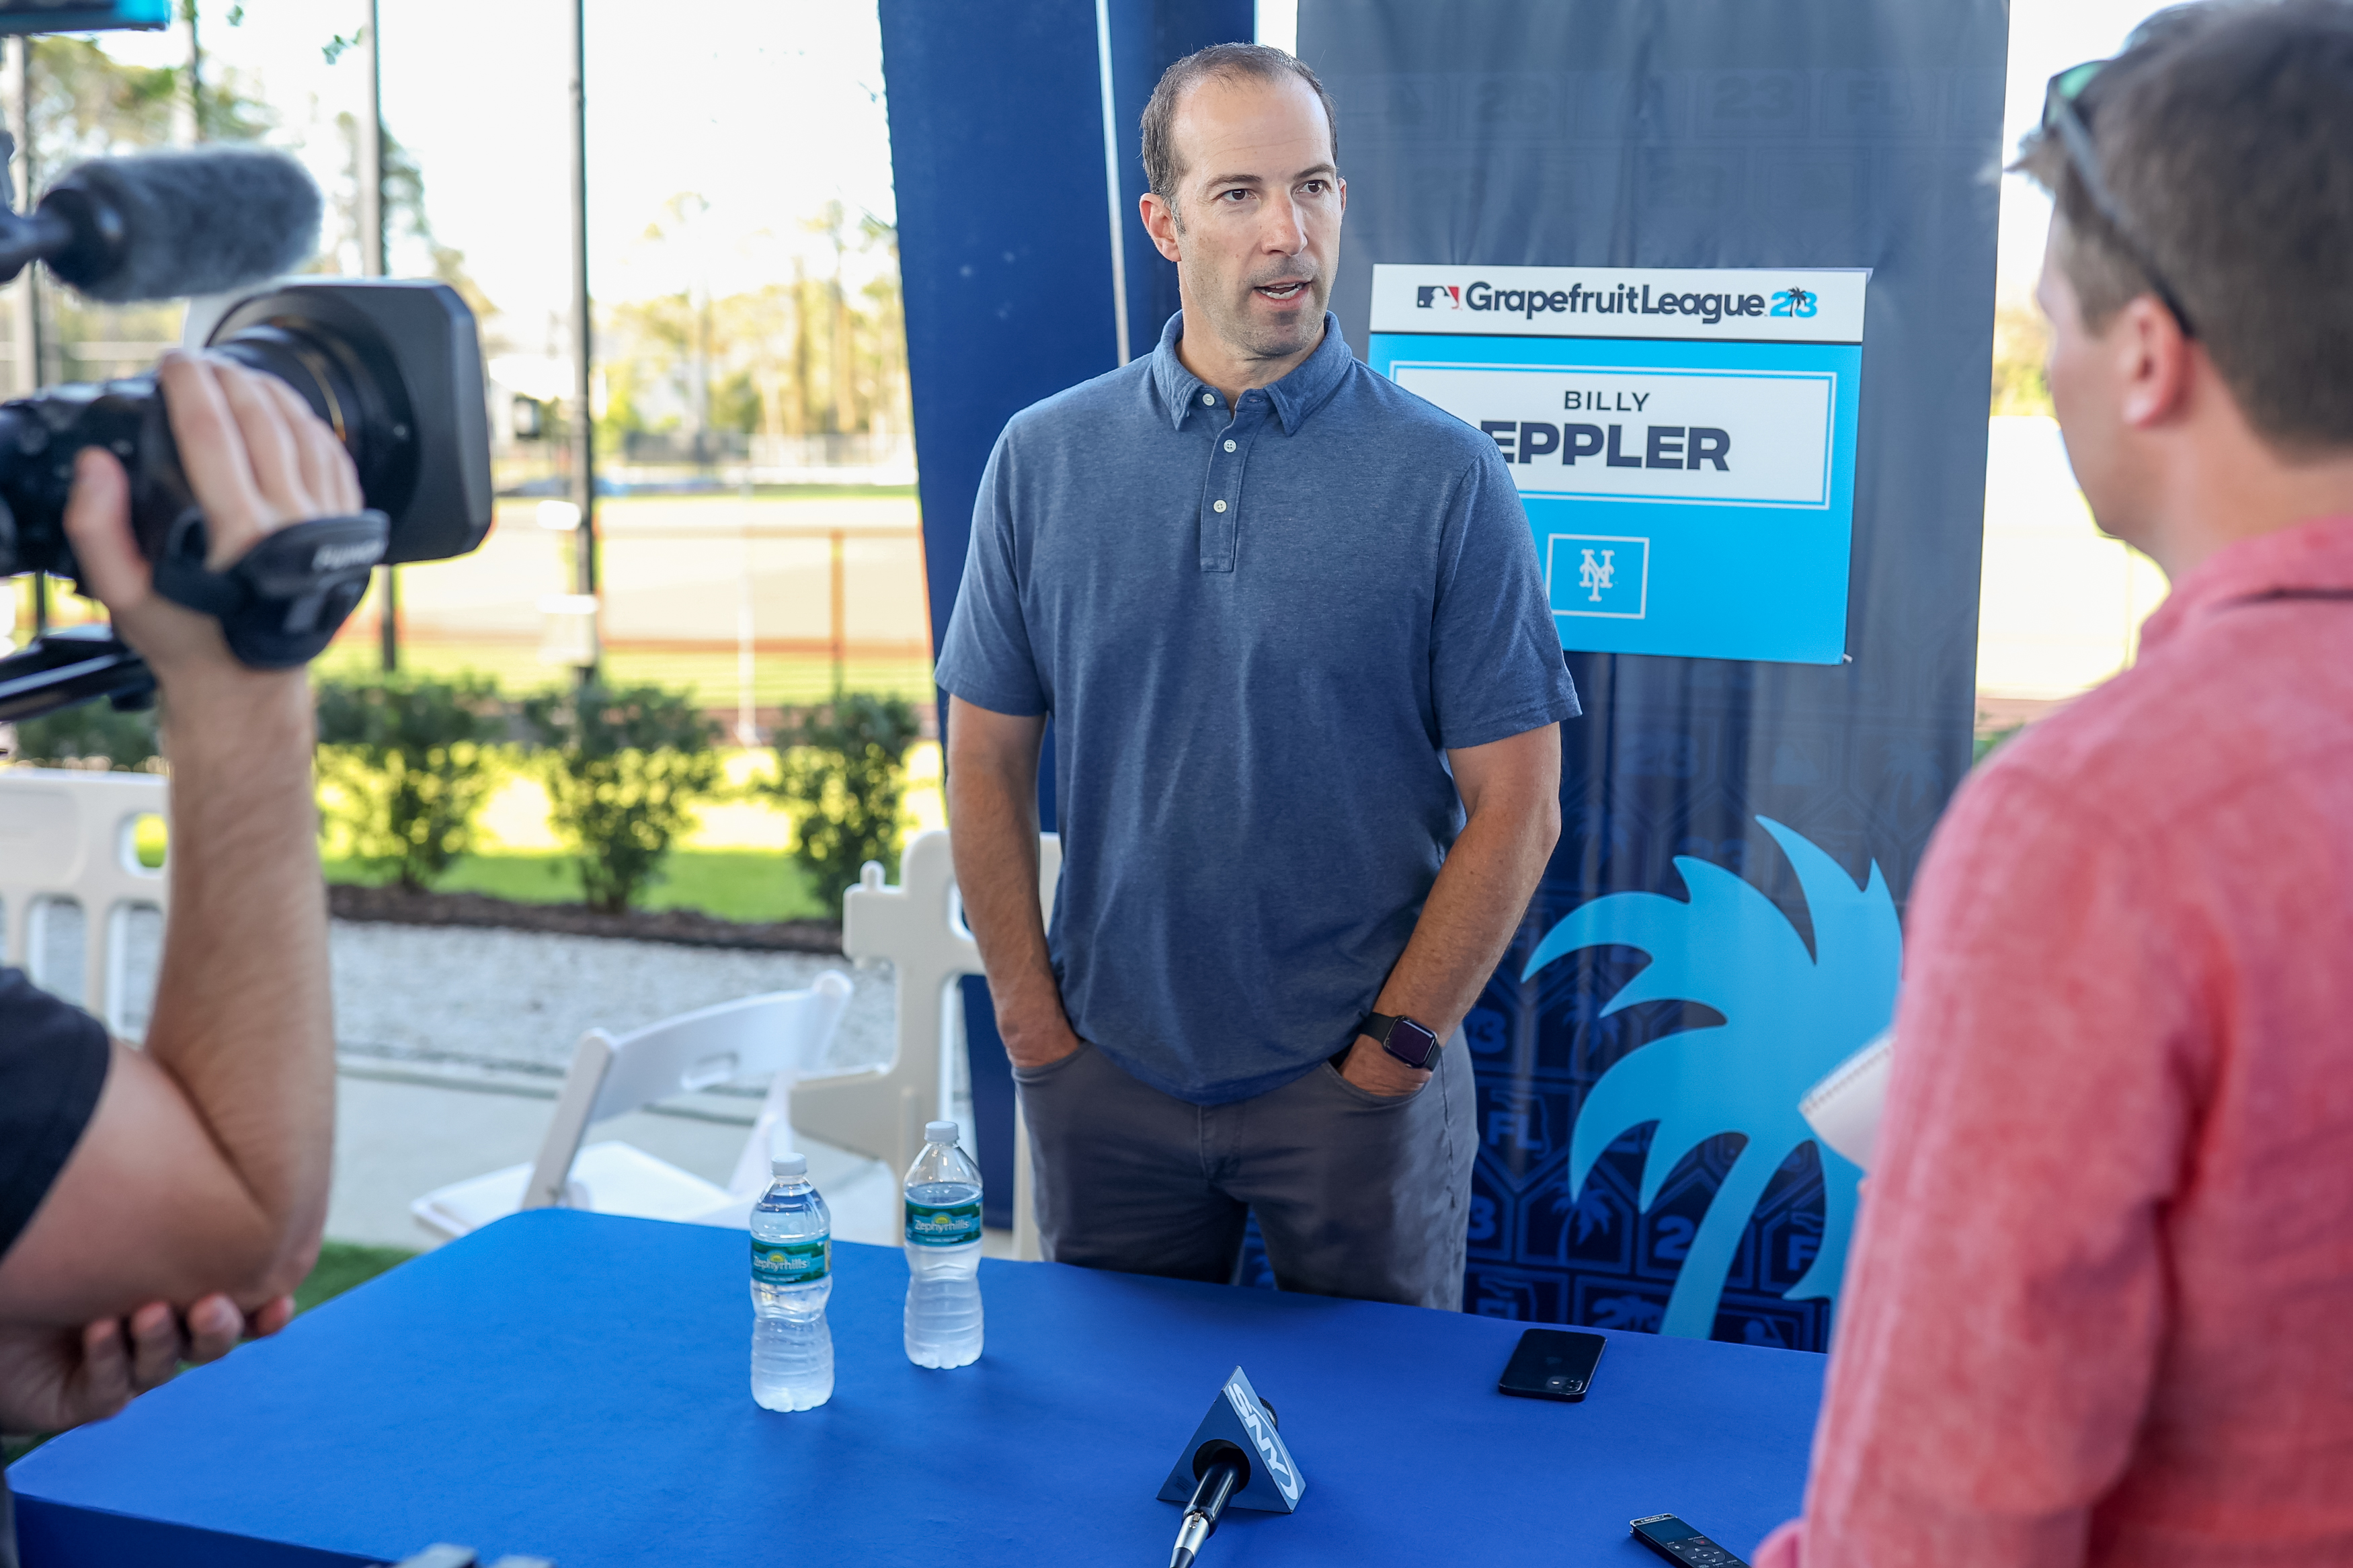 After trading Scherzer to Texas, GM Billy Eppler says the Mets are